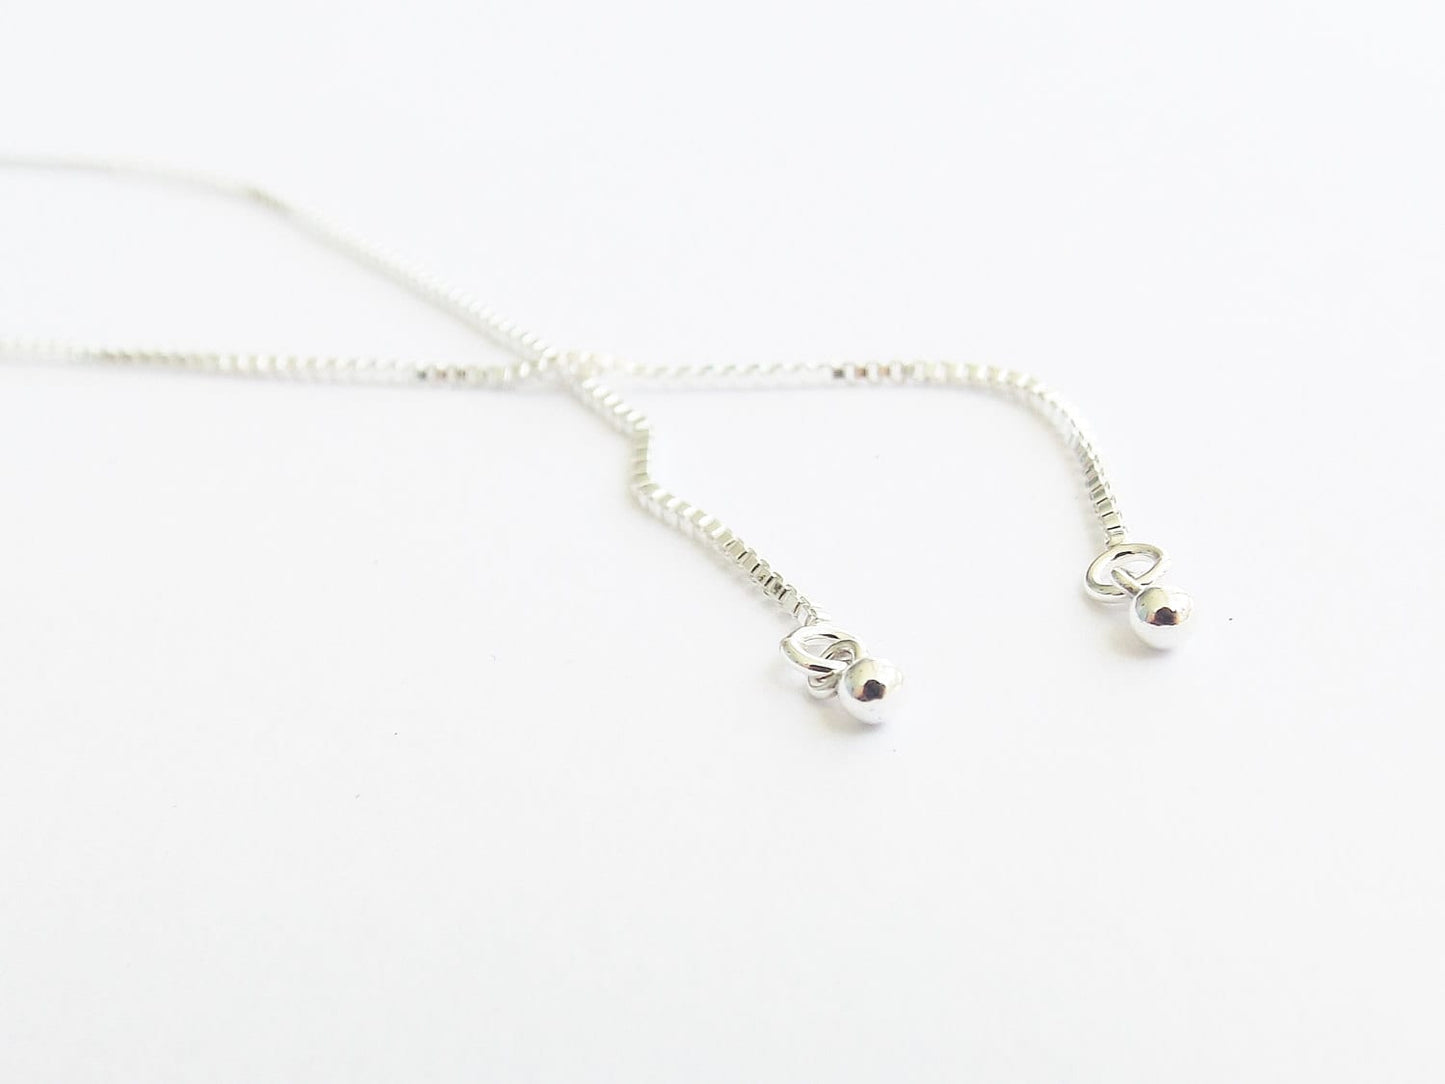 Threader Earrings,Simple Threaders,Super Tiny Bead Threader,Sleek Earrings,Simple Everyday,Modern Jewelry,Unique Slender,Silver Drop Earring